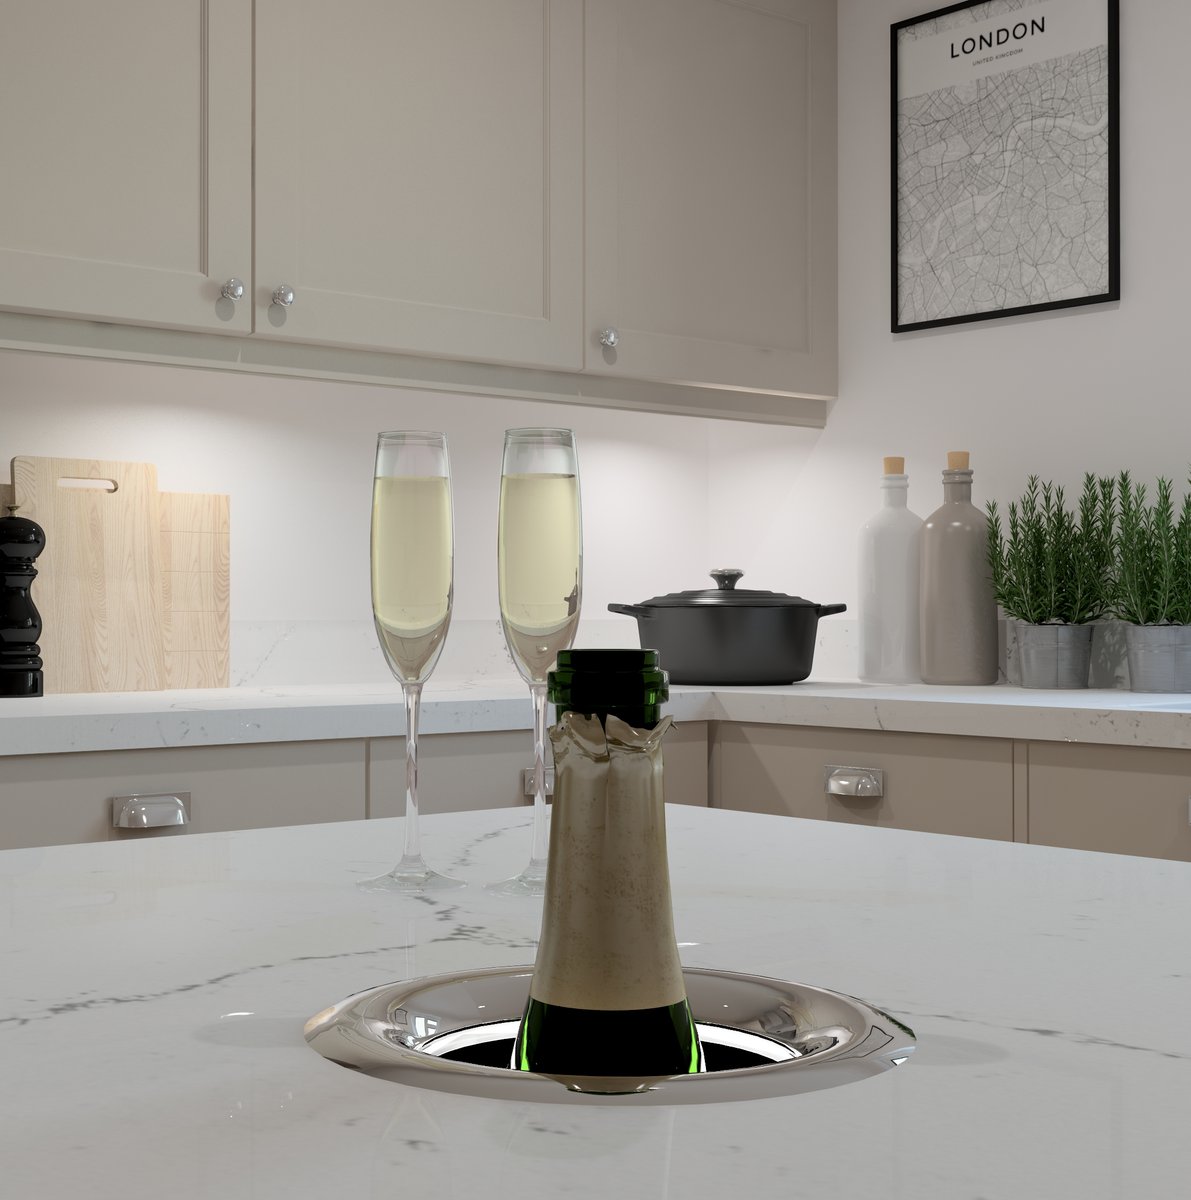 We've partnered with @Kaelo_UK to bring you access to their open bottle hosts in ArtiCAD-Pro 🥂🍾 Download from the Members Portal now and start creating designs just like the one you see here featuring Kaelo's open bottle host in stainless steel. #articad #kitchendesign